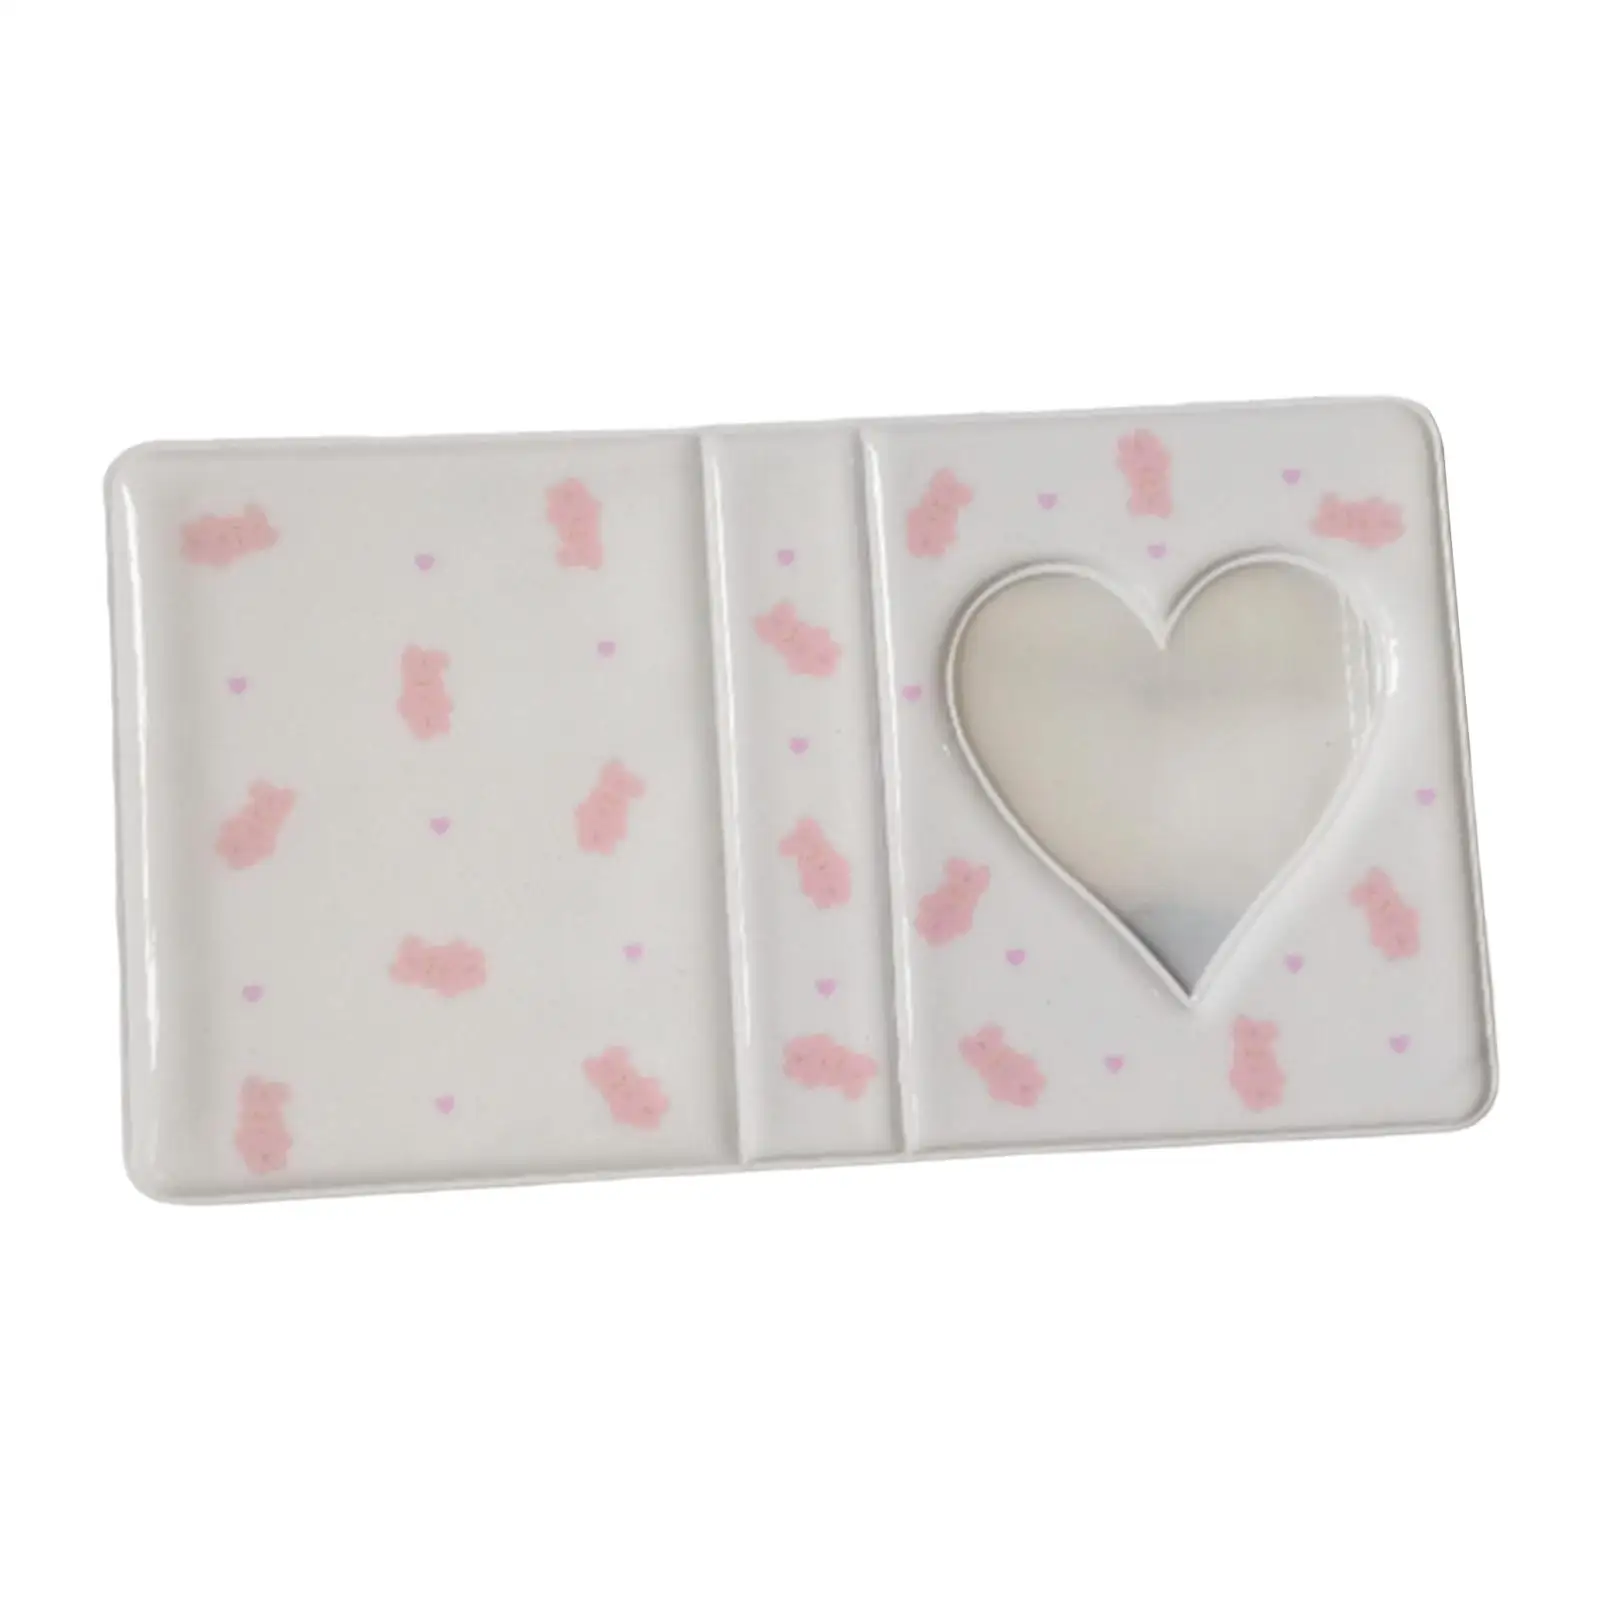 3 inch Photo Album Photocard Sleeves Cute for Card Collectiors Photo Storage